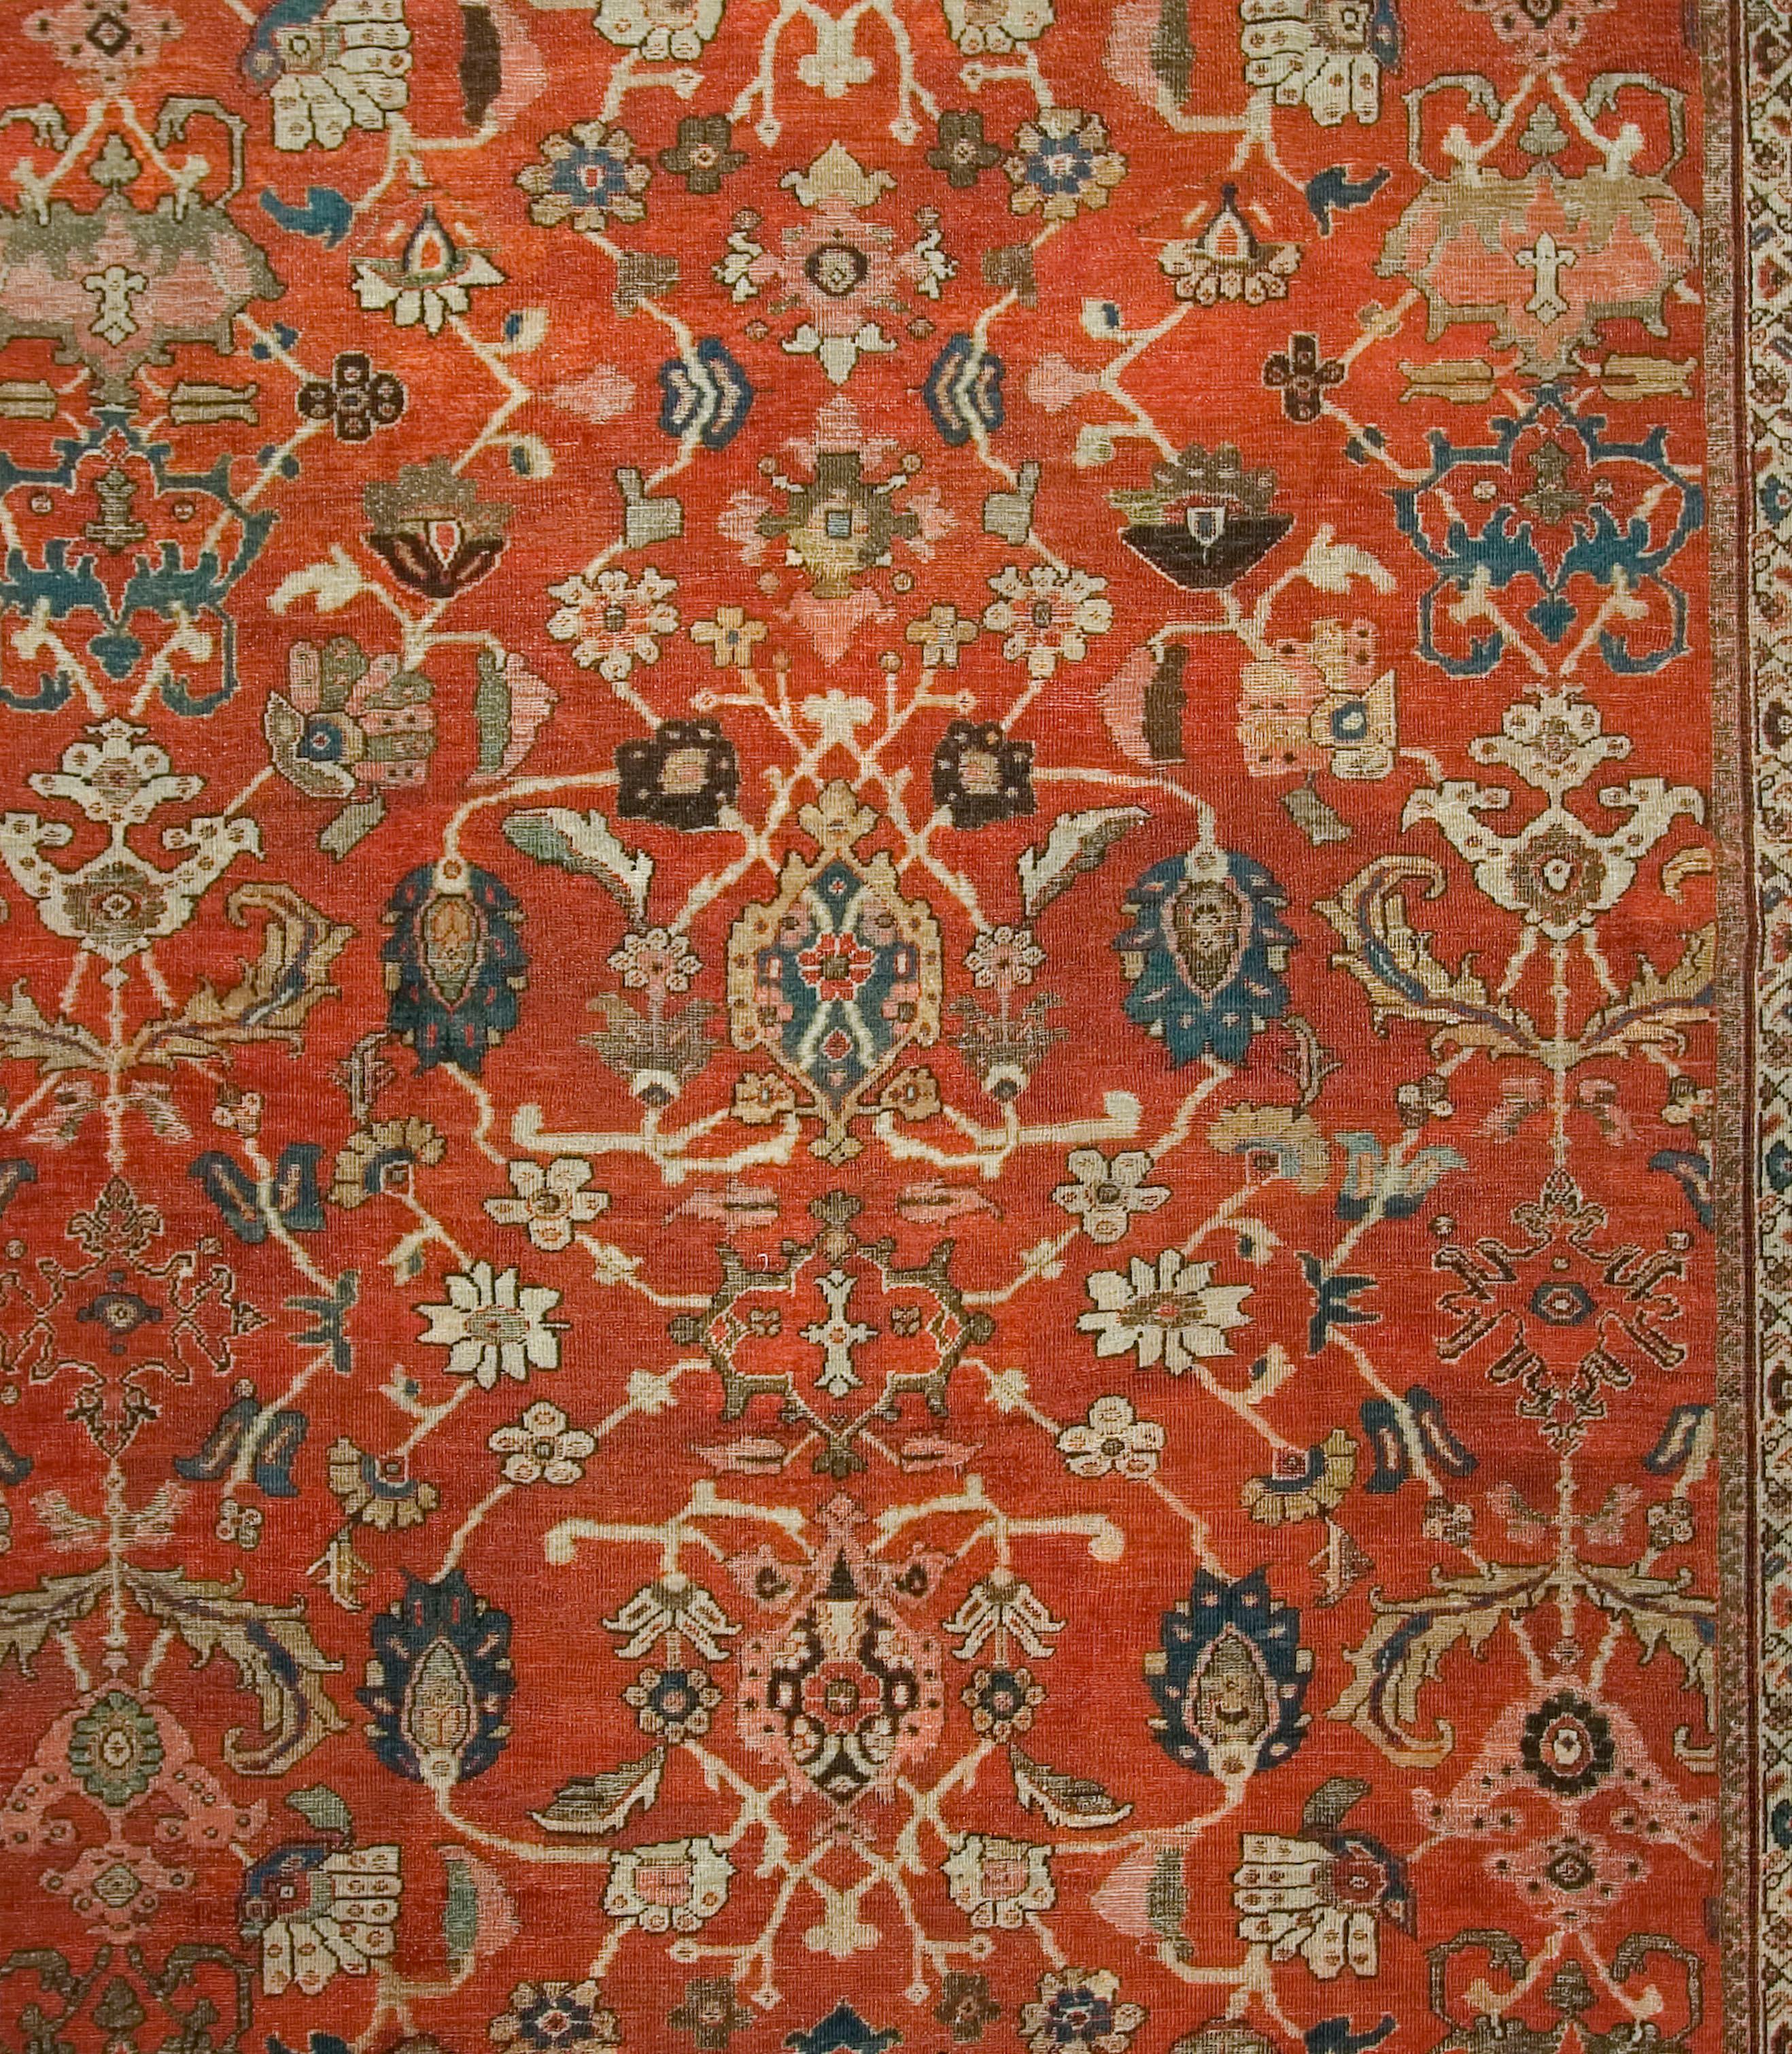 Persian Sultanabad rug carpet, circa 1880, 10'3 x 13'10. Bold overall patterns were a specialty of the Manchester-based Ziegler Company in Sultanabad in the 1900 epoch. Although the patterns are clearly “oriental”, they do not copy or even closely